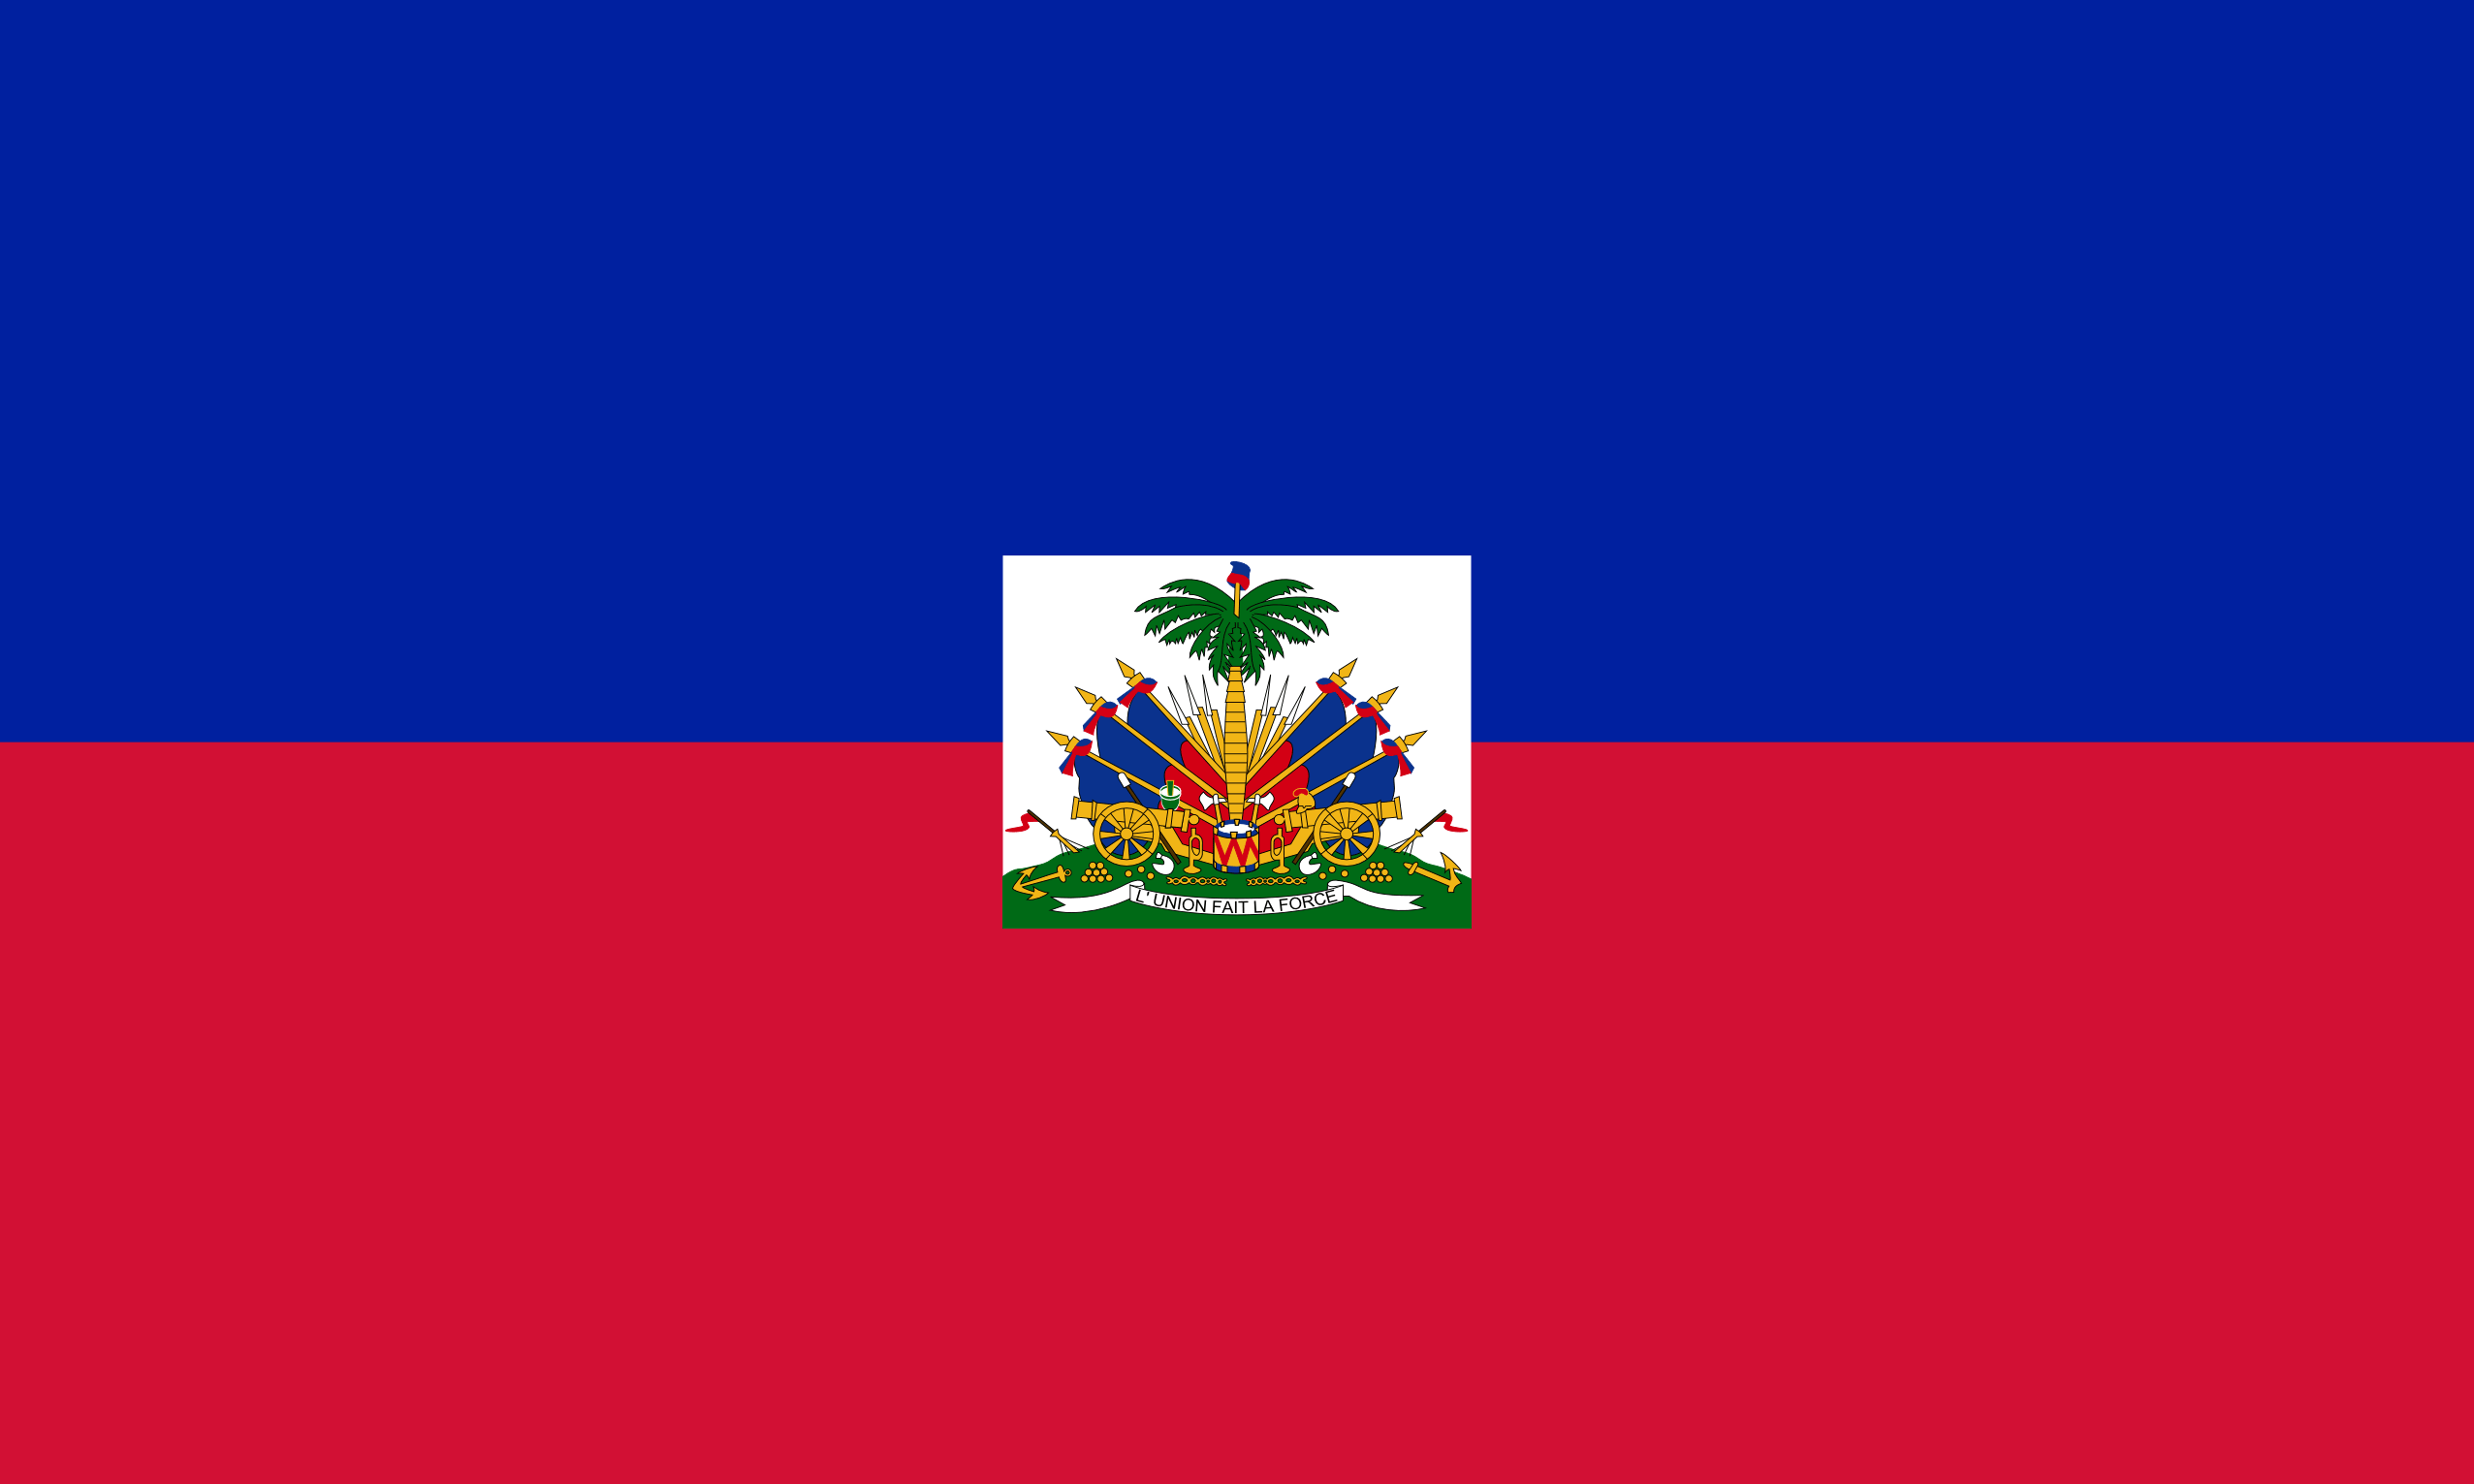 the image shows the haitian flag